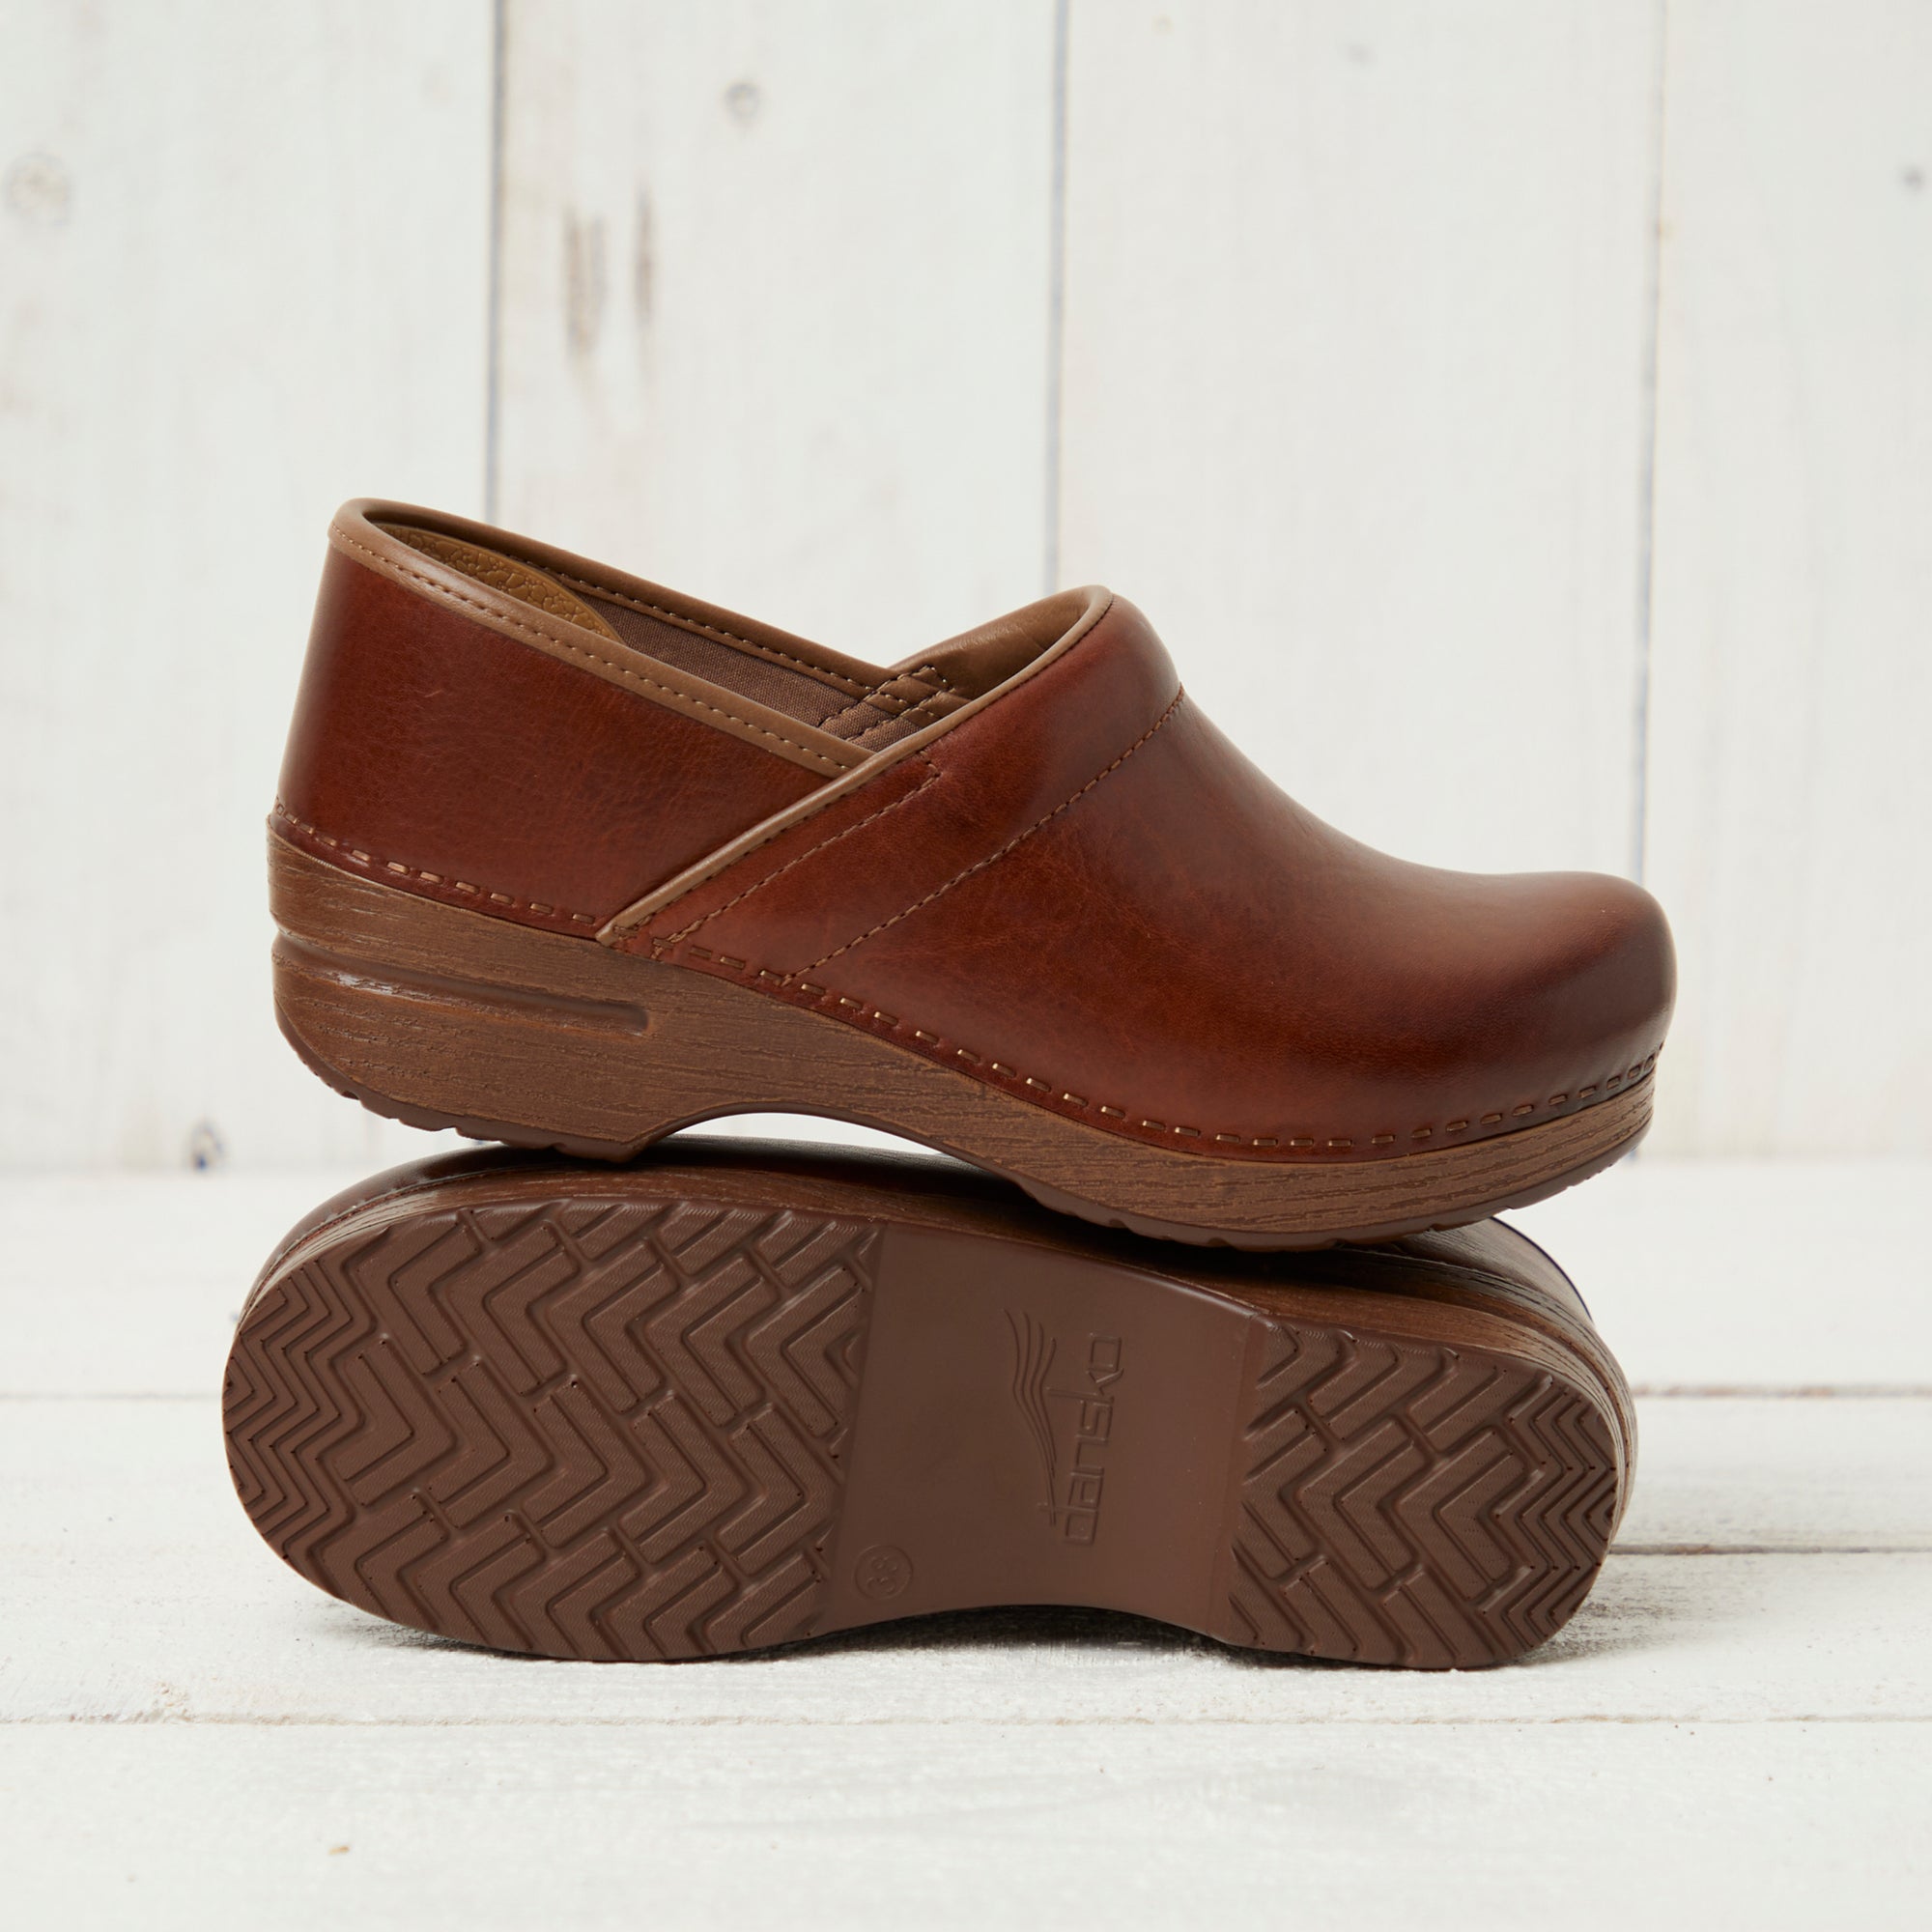 Professional saddle leather clog showing outsole detail.